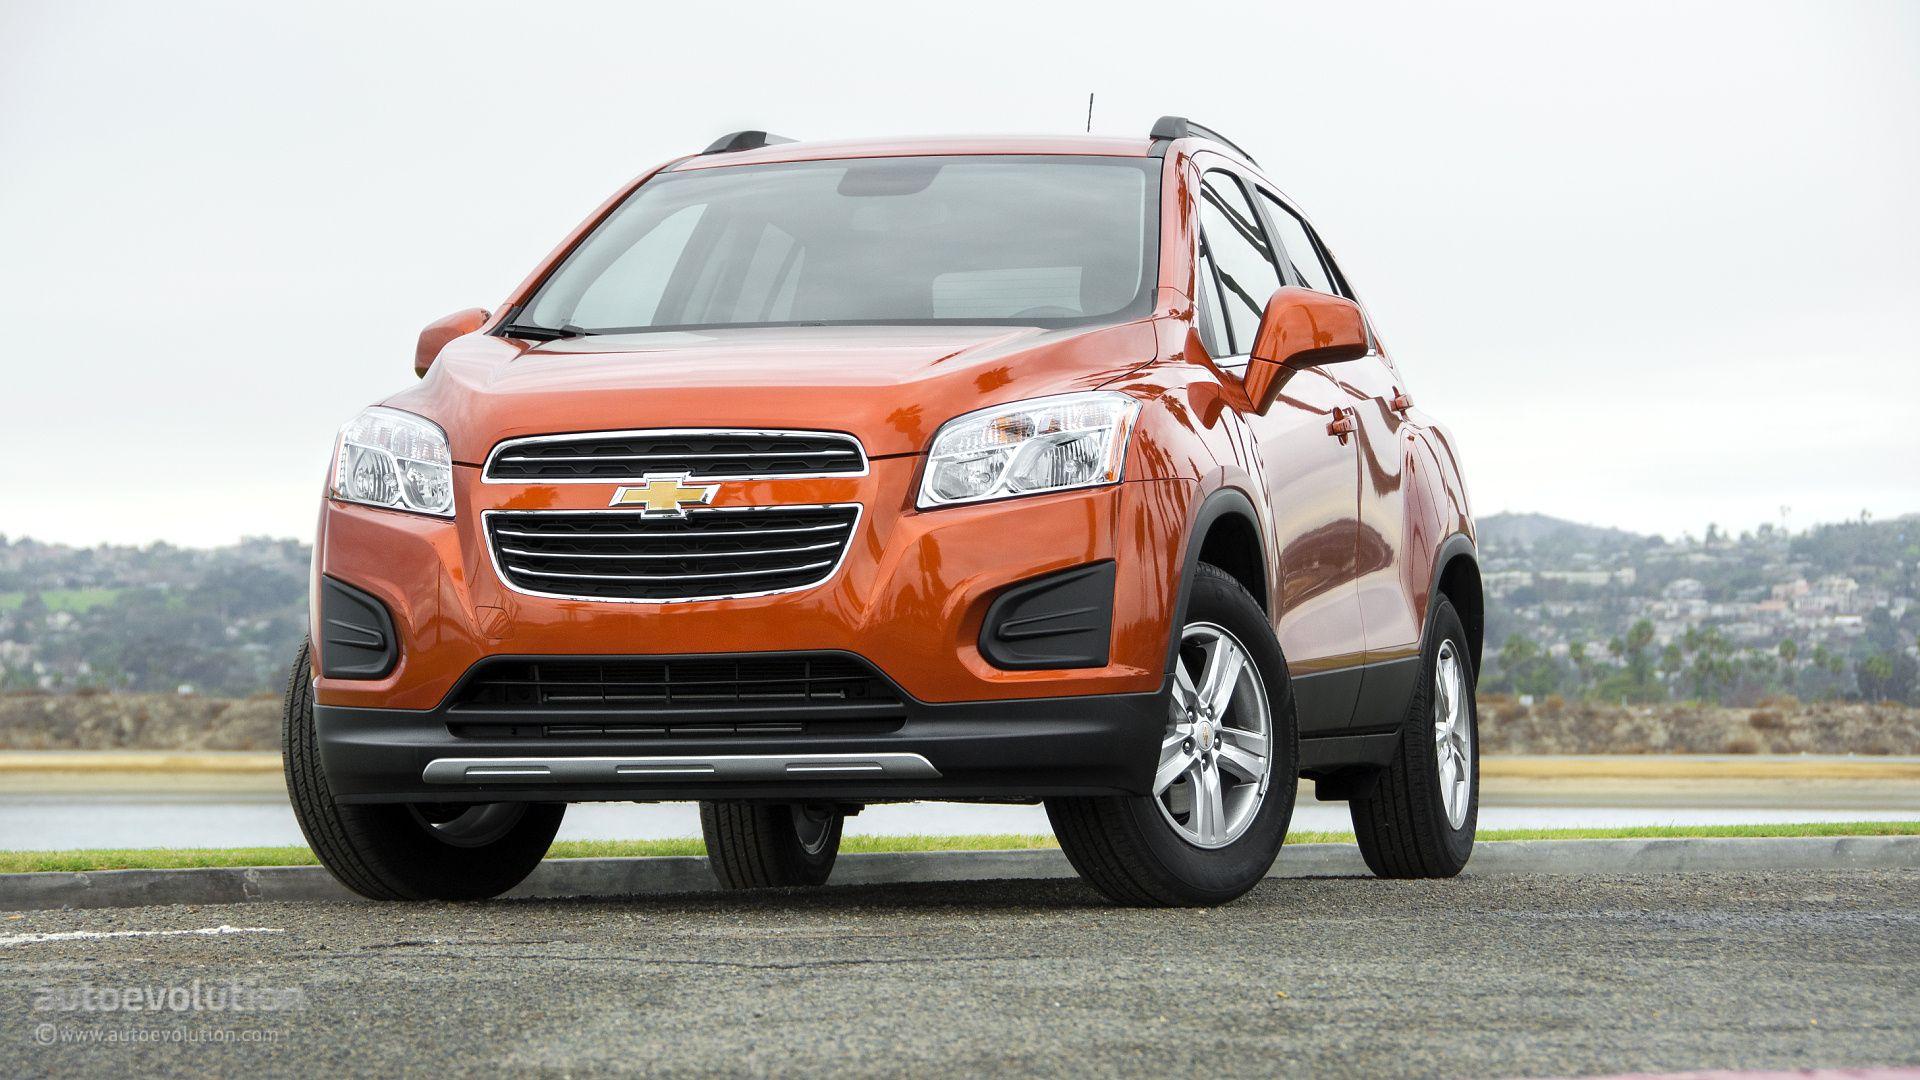 Chevrolet Trax Wallpaper: When Utility Meets Lifestyle